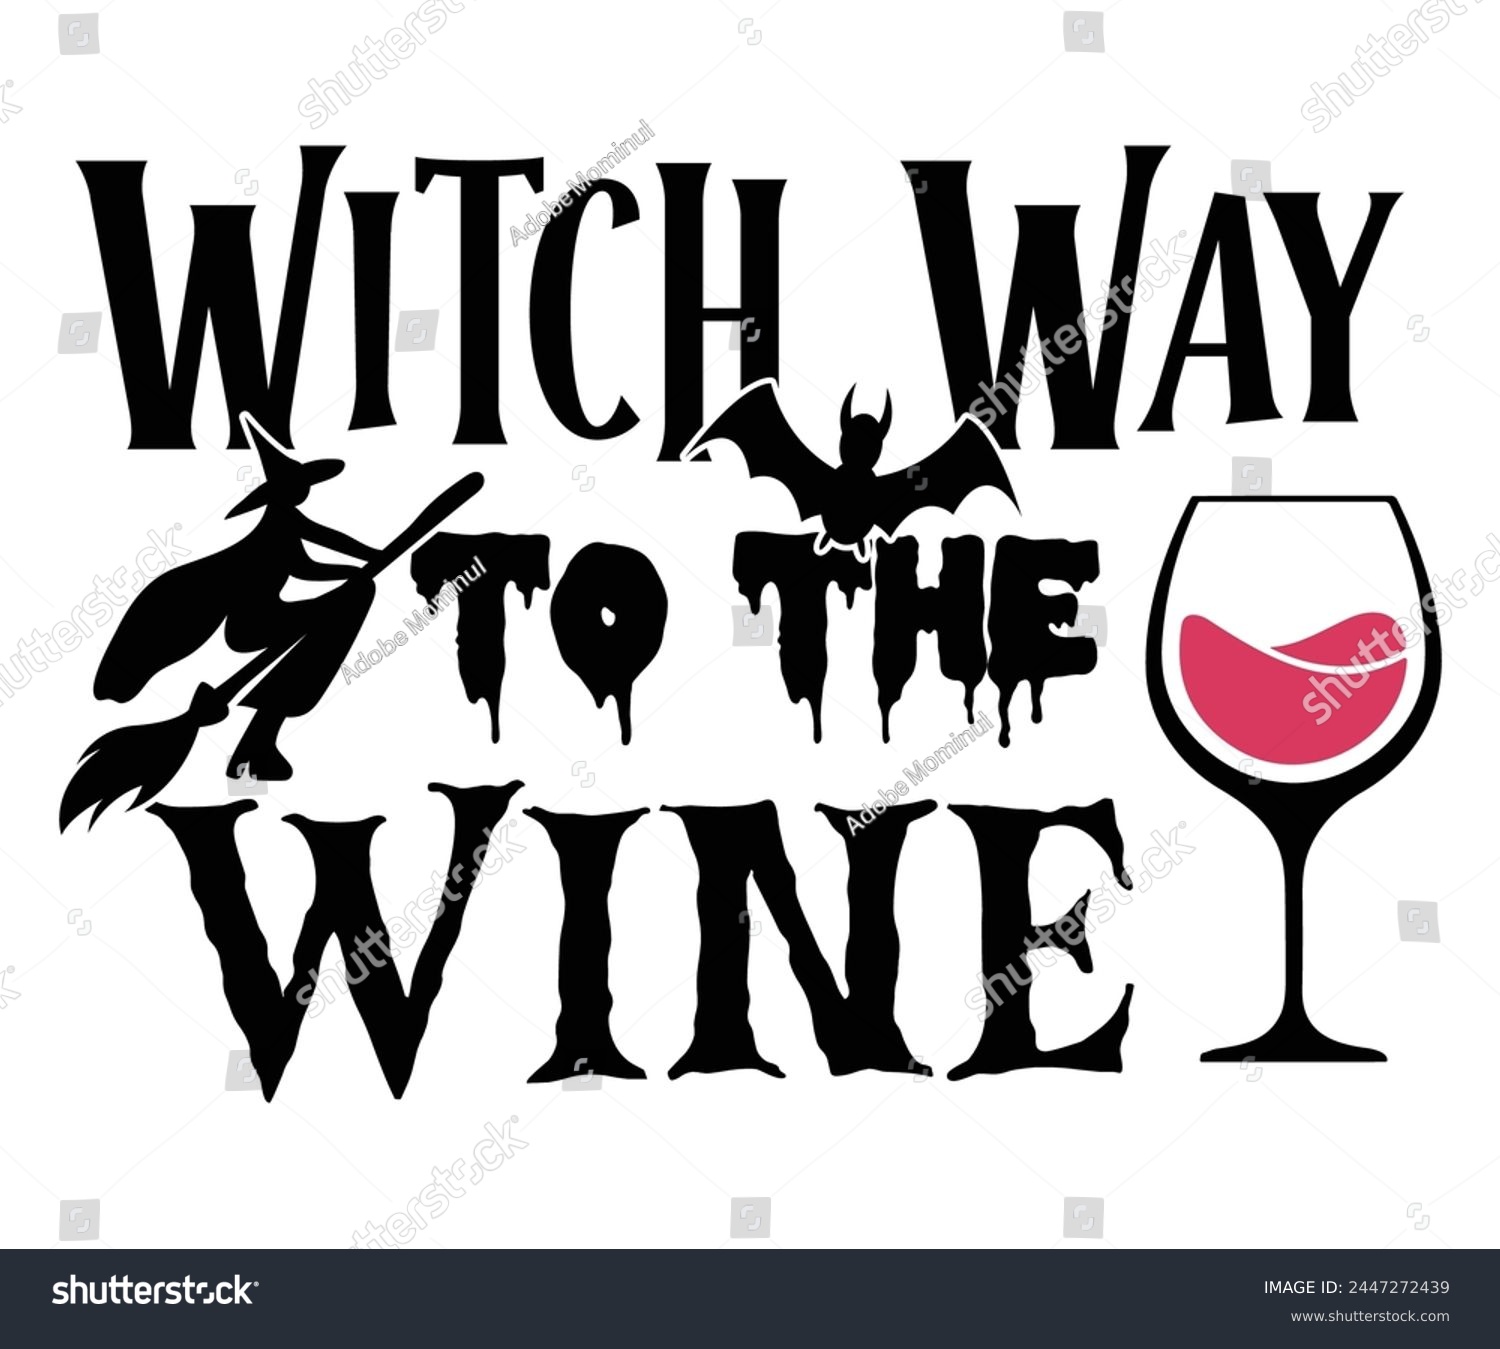 SVG of Witch Way To The Wine,Halloween Svg,Typography,Halloween Quotes,Witches Svg,Halloween Party,Halloween Costume,Halloween Gift,Funny Halloween,Spooky Svg,Funny T shirt,Ghost Svg,Cut file svg